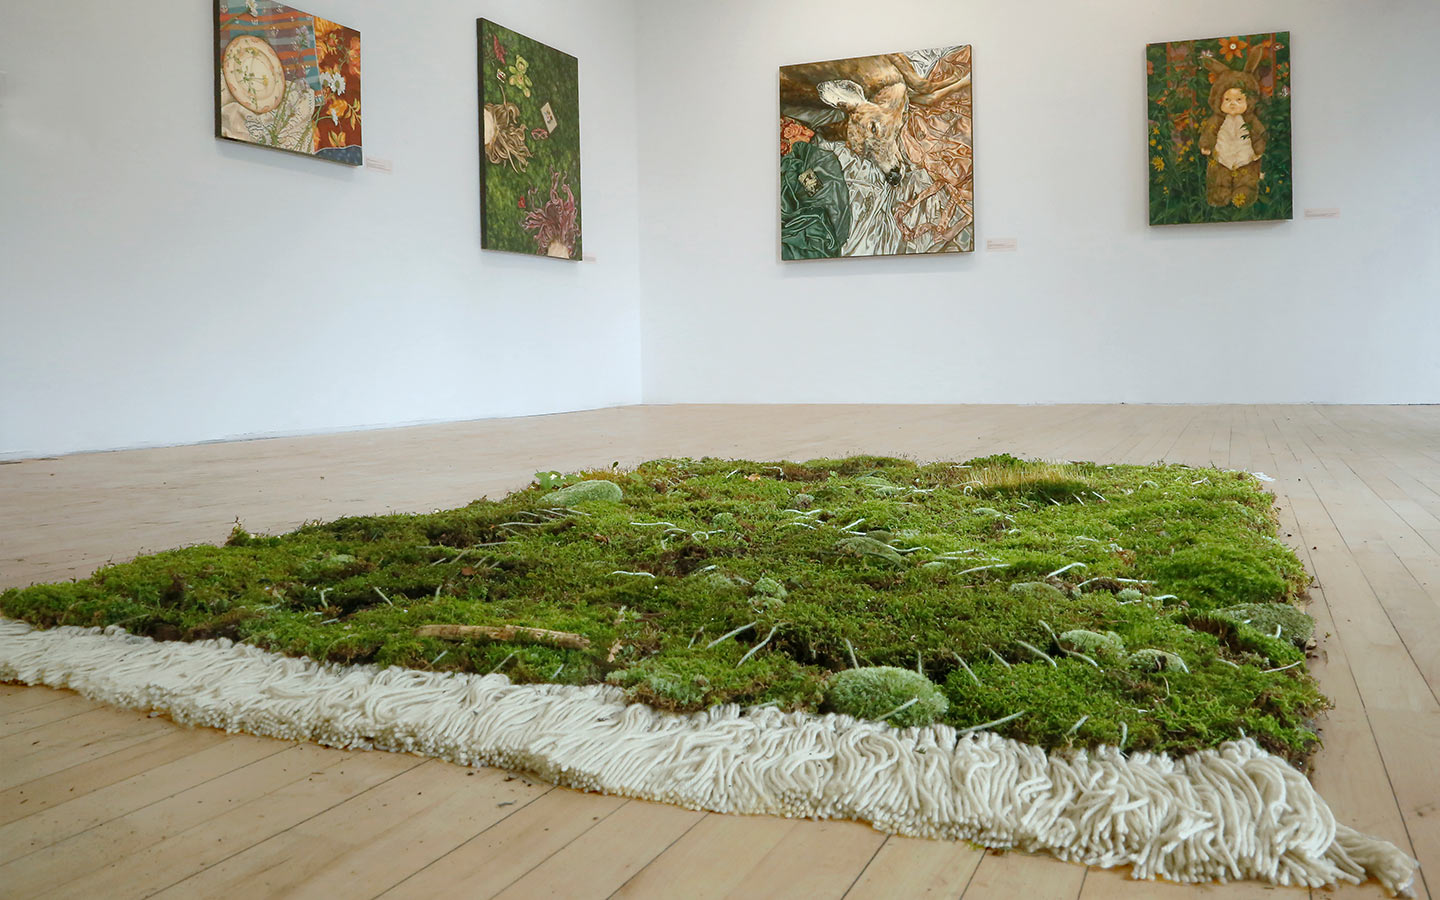 A green mossy like rug in the middle of a white walled gallery space with paintings on the wall.